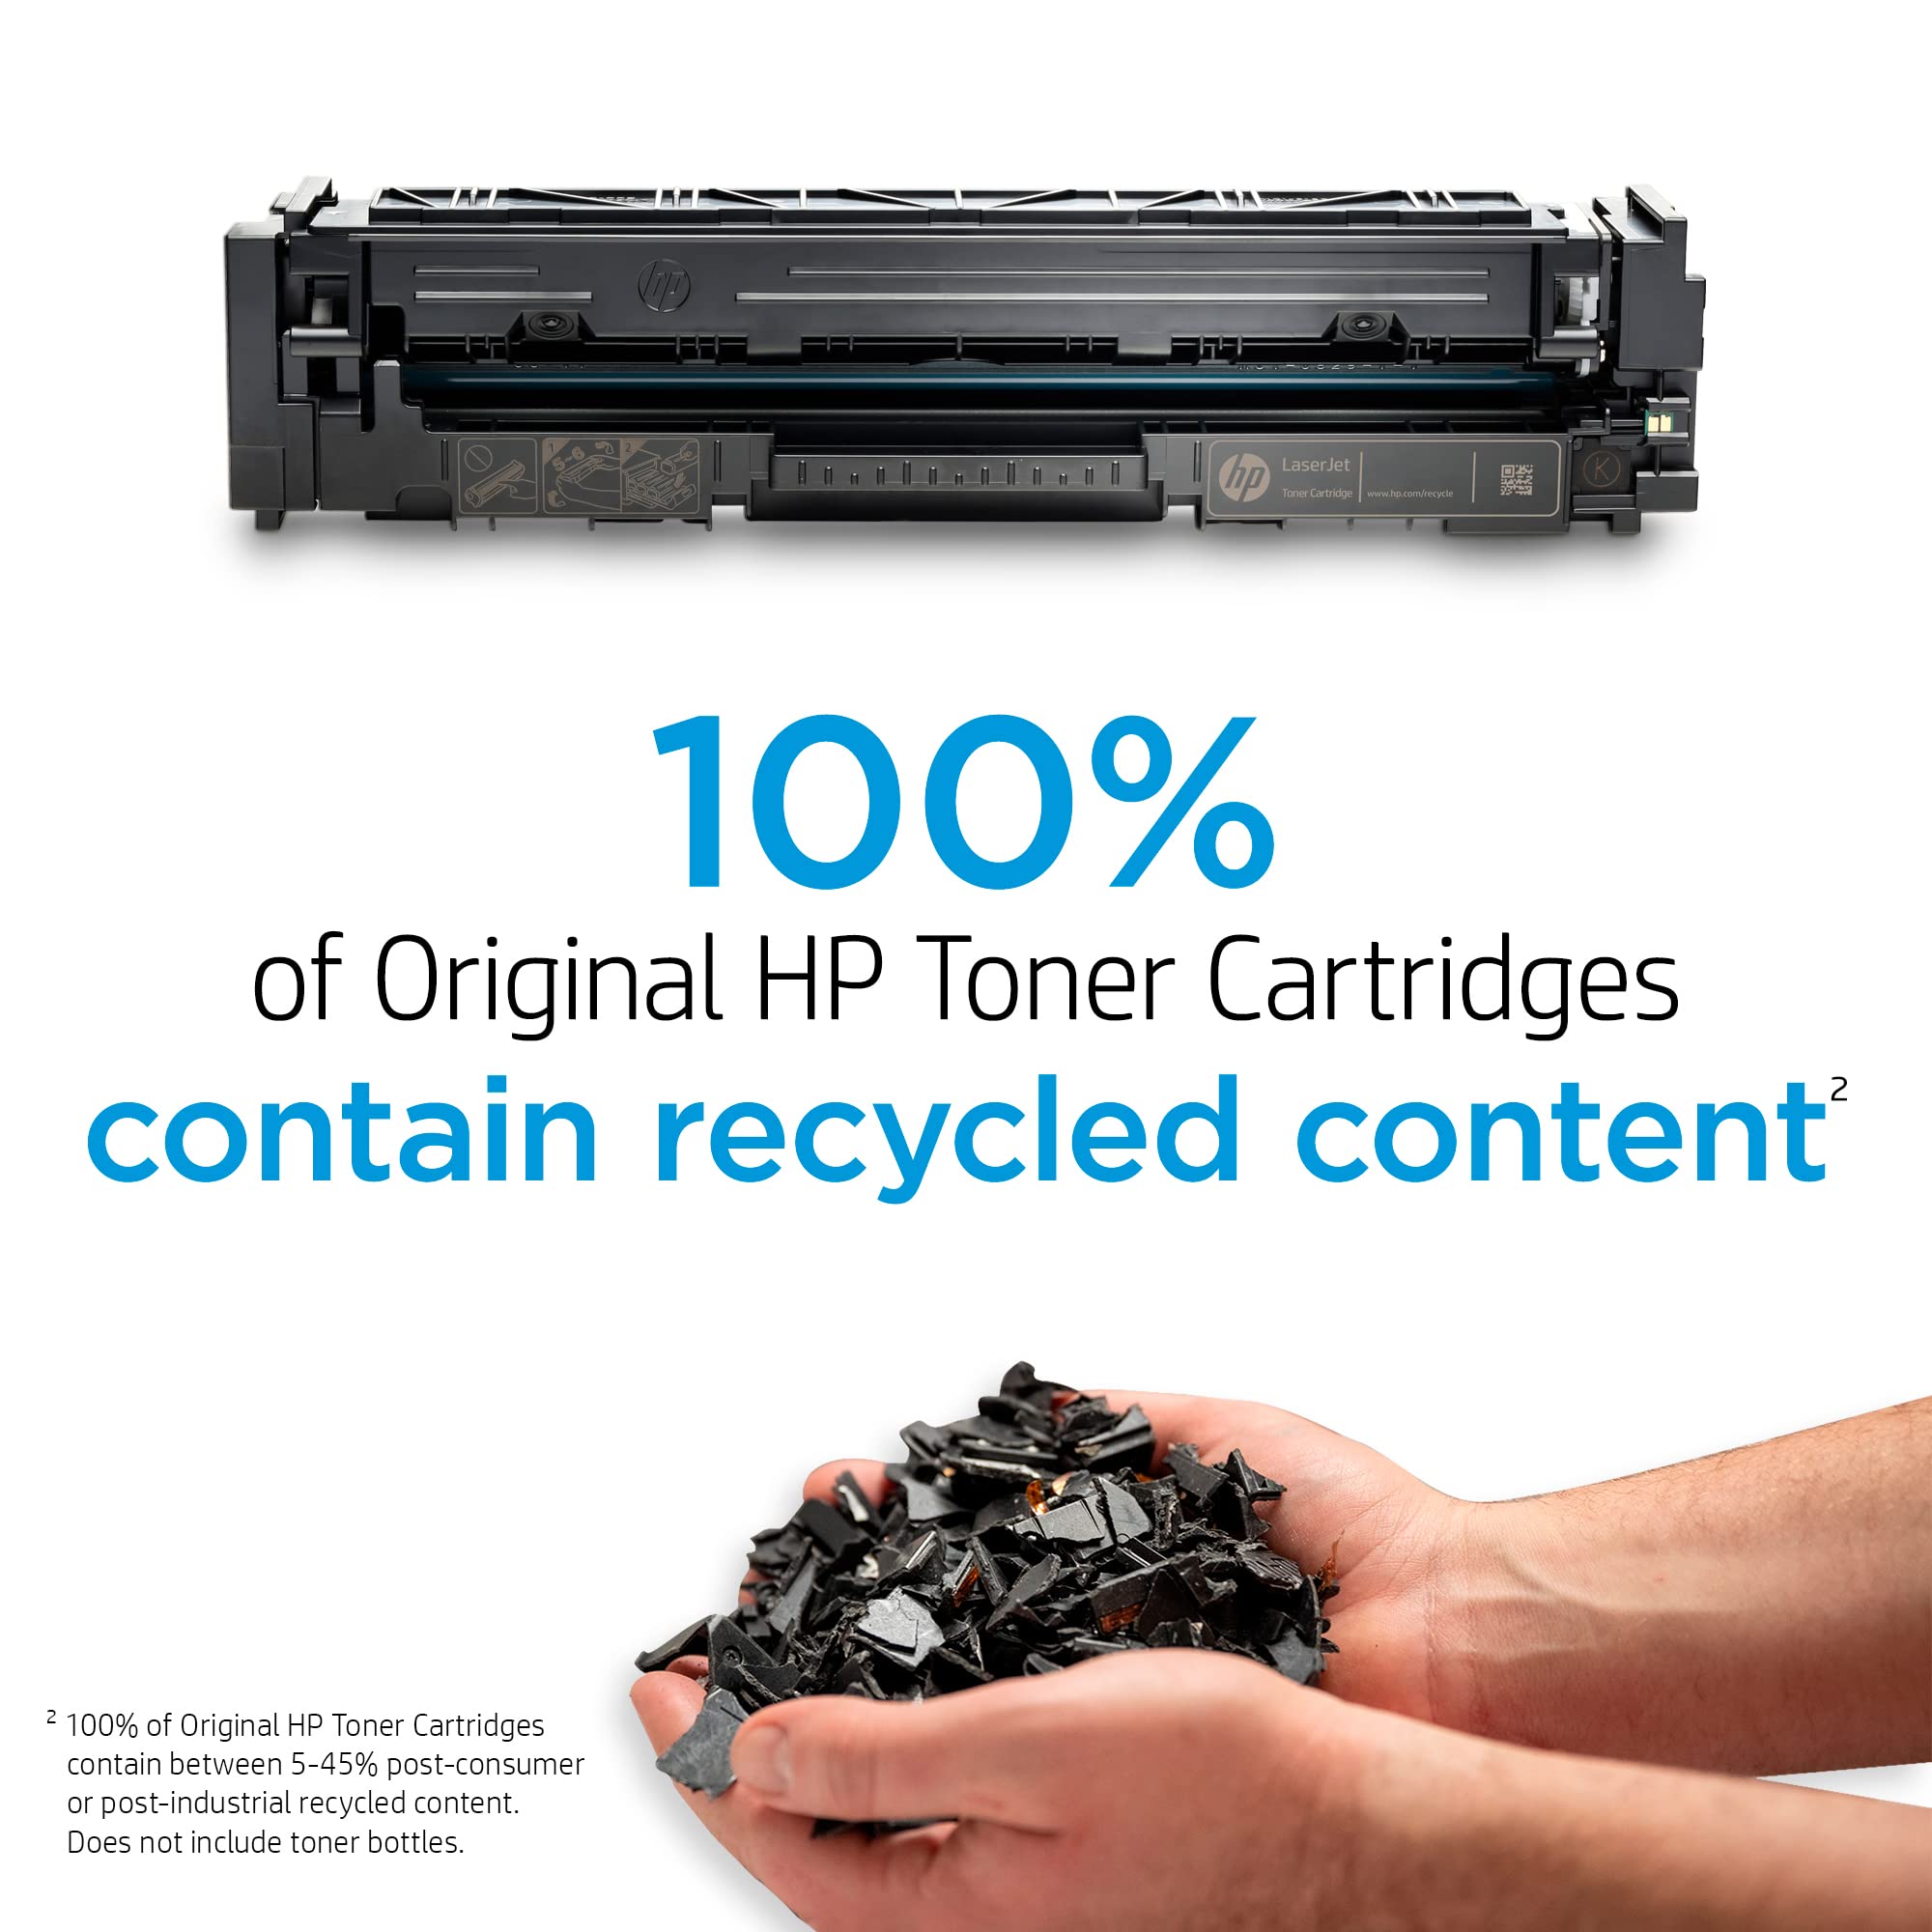 HP 414A Yellow Toner Cartridge | Works with HP Color LaserJet Enterprise M455dn, MFP M480f; HP Color LaserJet Pro M454 Series, HP Color LaserJet Pro MFP M479 Series | W2022A